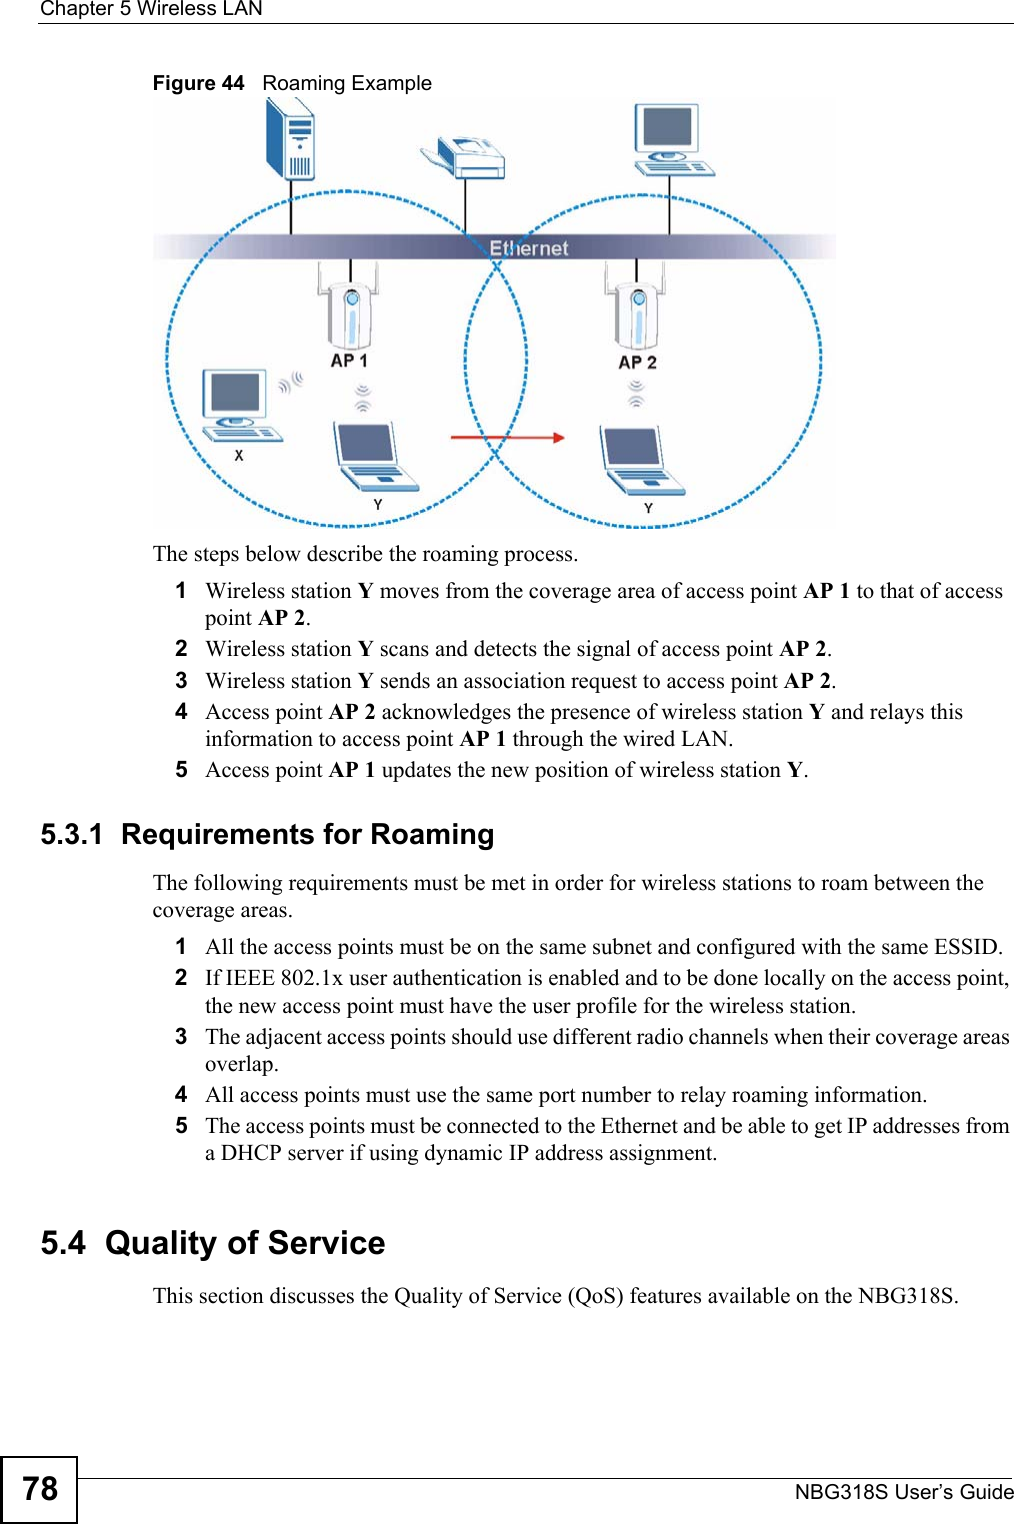 Chapter 5 Wireless LANNBG318S User’s Guide78Figure 44   Roaming ExampleThe steps below describe the roaming process.1Wireless station Y moves from the coverage area of access point AP 1 to that of access point AP 2. 2Wireless station Y scans and detects the signal of access point AP 2. 3Wireless station Y sends an association request to access point AP 2.4Access point AP 2 acknowledges the presence of wireless station Y and relays this information to access point AP 1 through the wired LAN. 5Access point AP 1 updates the new position of wireless station Y.5.3.1  Requirements for RoamingThe following requirements must be met in order for wireless stations to roam between the coverage areas. 1All the access points must be on the same subnet and configured with the same ESSID. 2If IEEE 802.1x user authentication is enabled and to be done locally on the access point, the new access point must have the user profile for the wireless station.3The adjacent access points should use different radio channels when their coverage areas overlap. 4All access points must use the same port number to relay roaming information. 5The access points must be connected to the Ethernet and be able to get IP addresses from a DHCP server if using dynamic IP address assignment. 5.4  Quality of ServiceThis section discusses the Quality of Service (QoS) features available on the NBG318S.